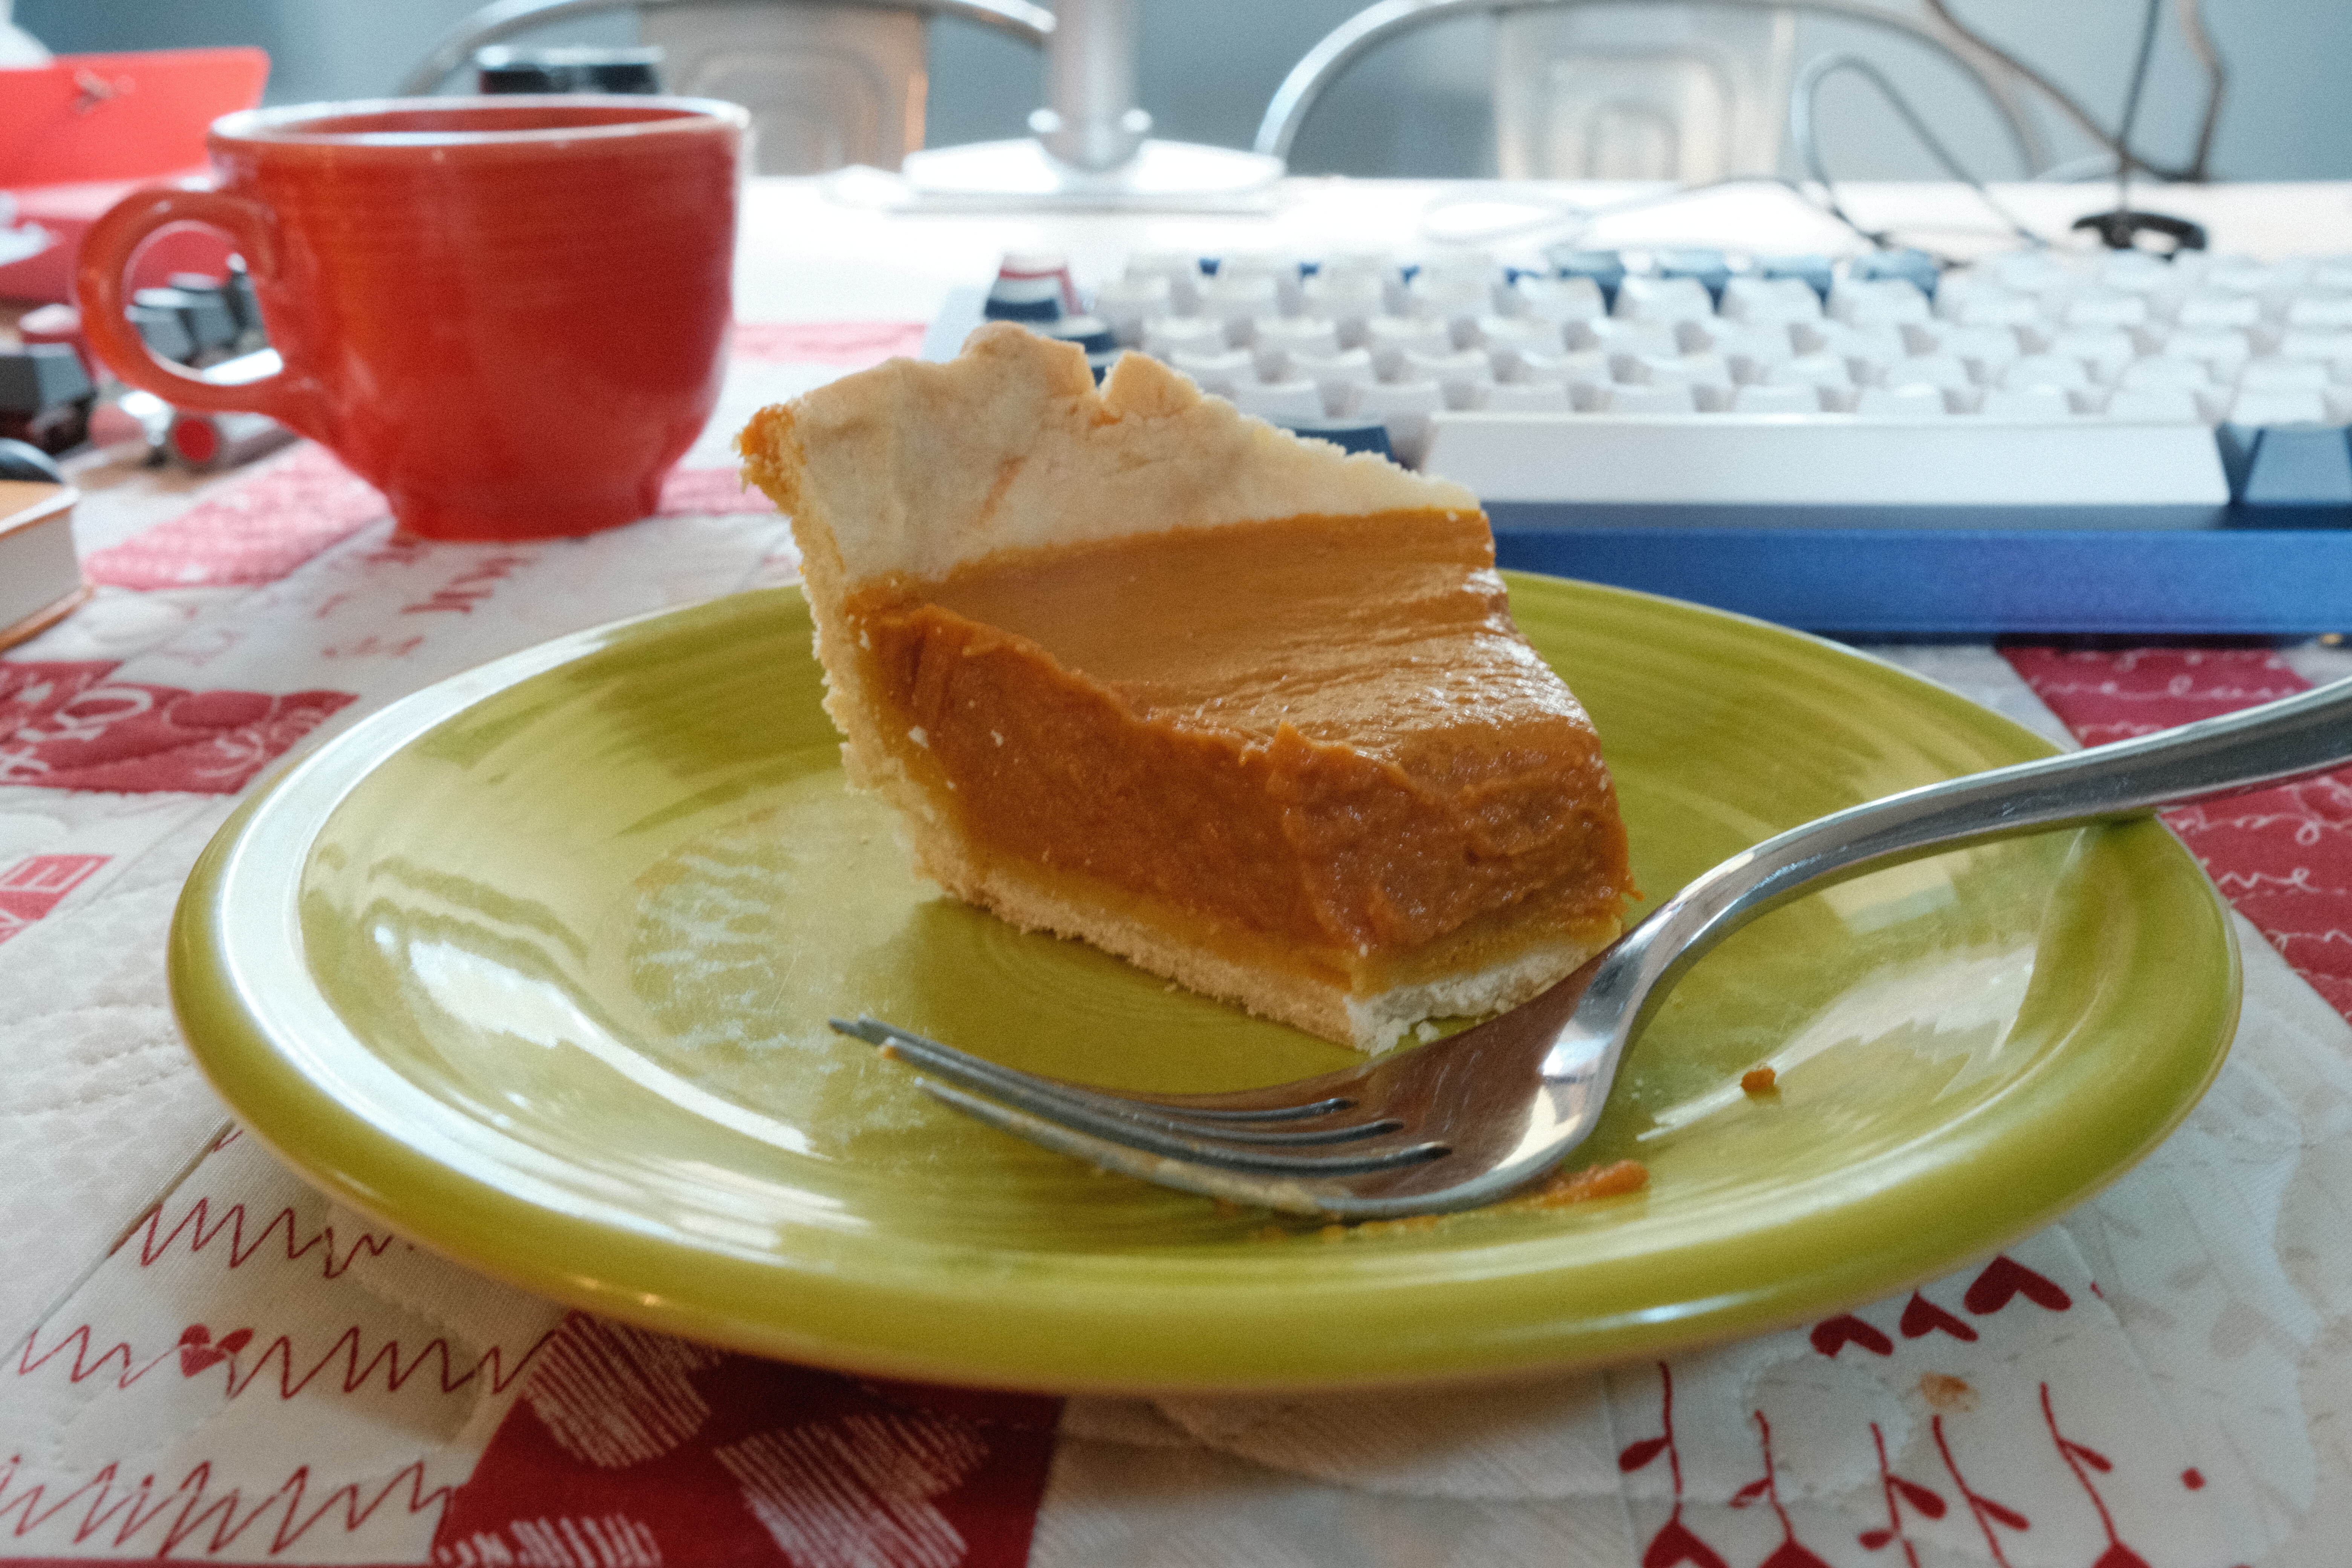 a slice of pumpkin pie on a bright green plate, in front of a white-keyed keyboard and orange coffee cup 